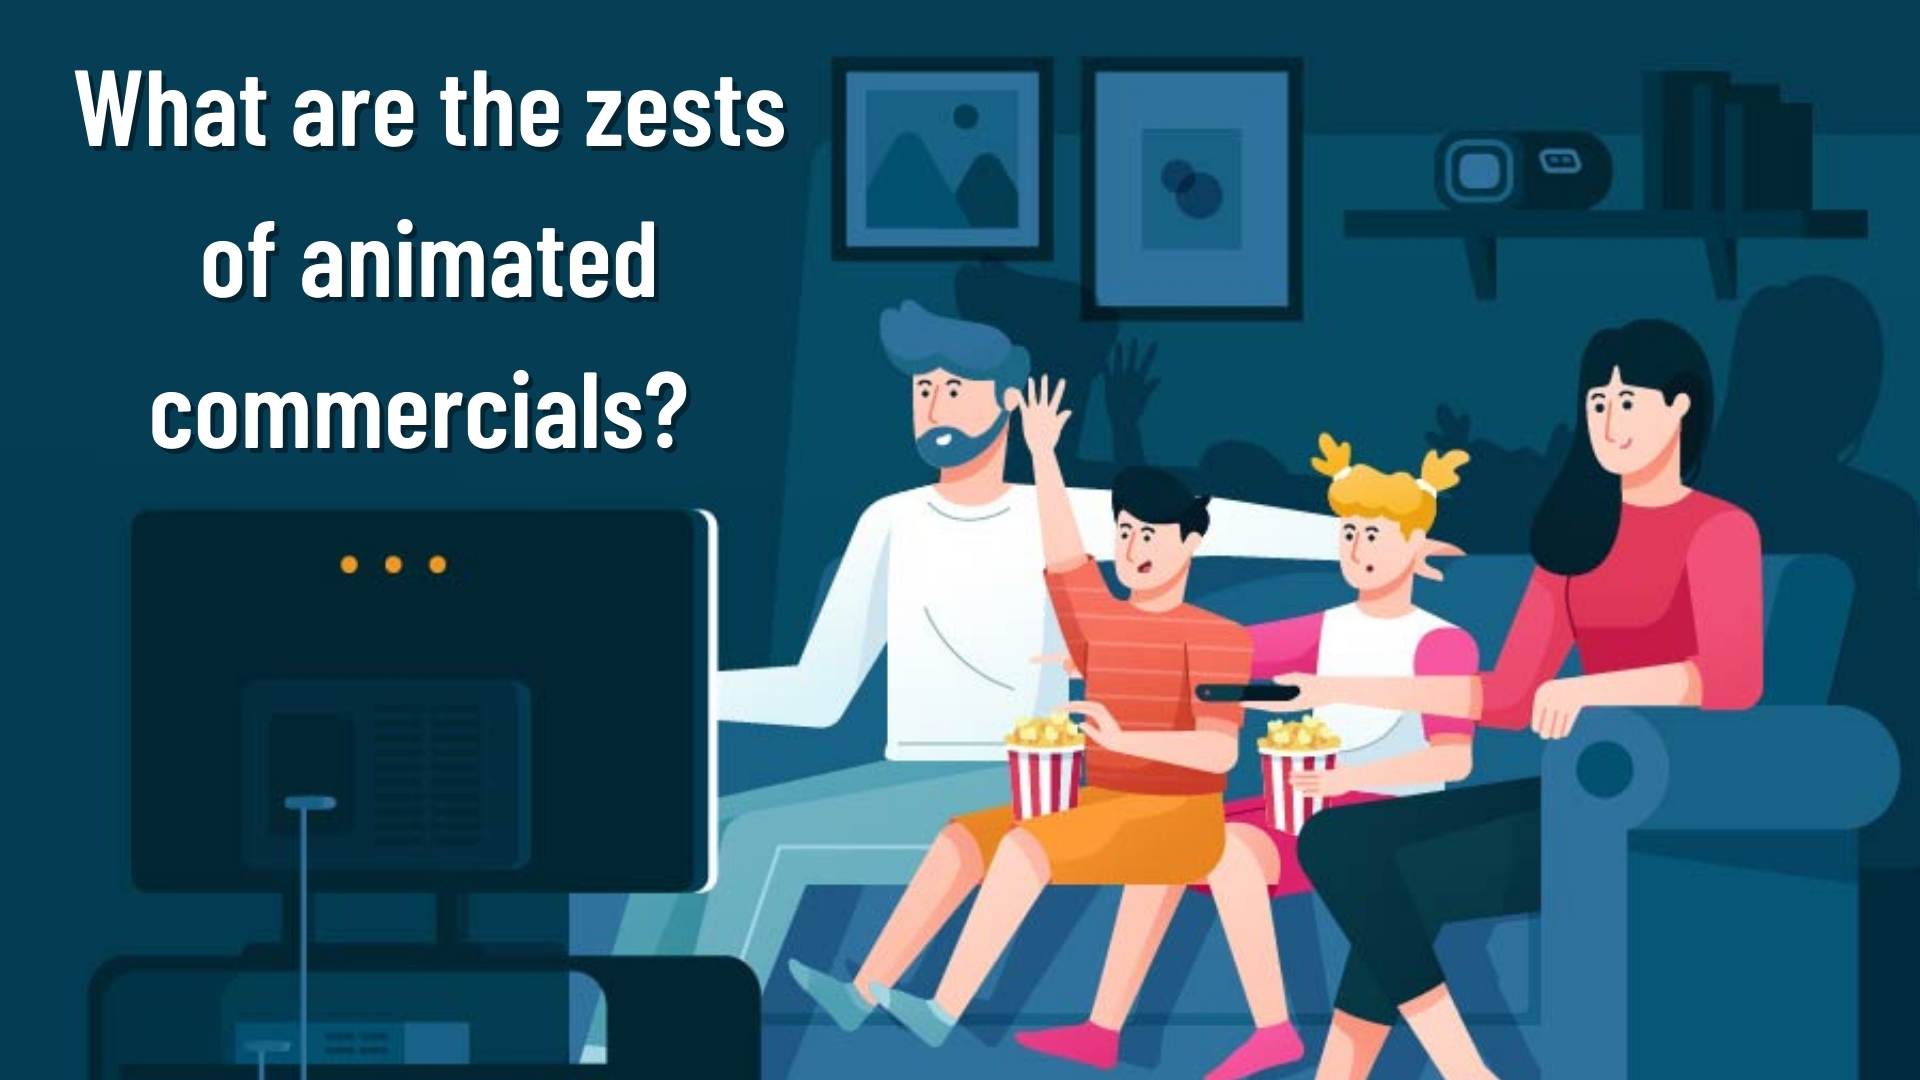 What are the zests of animated commercials?